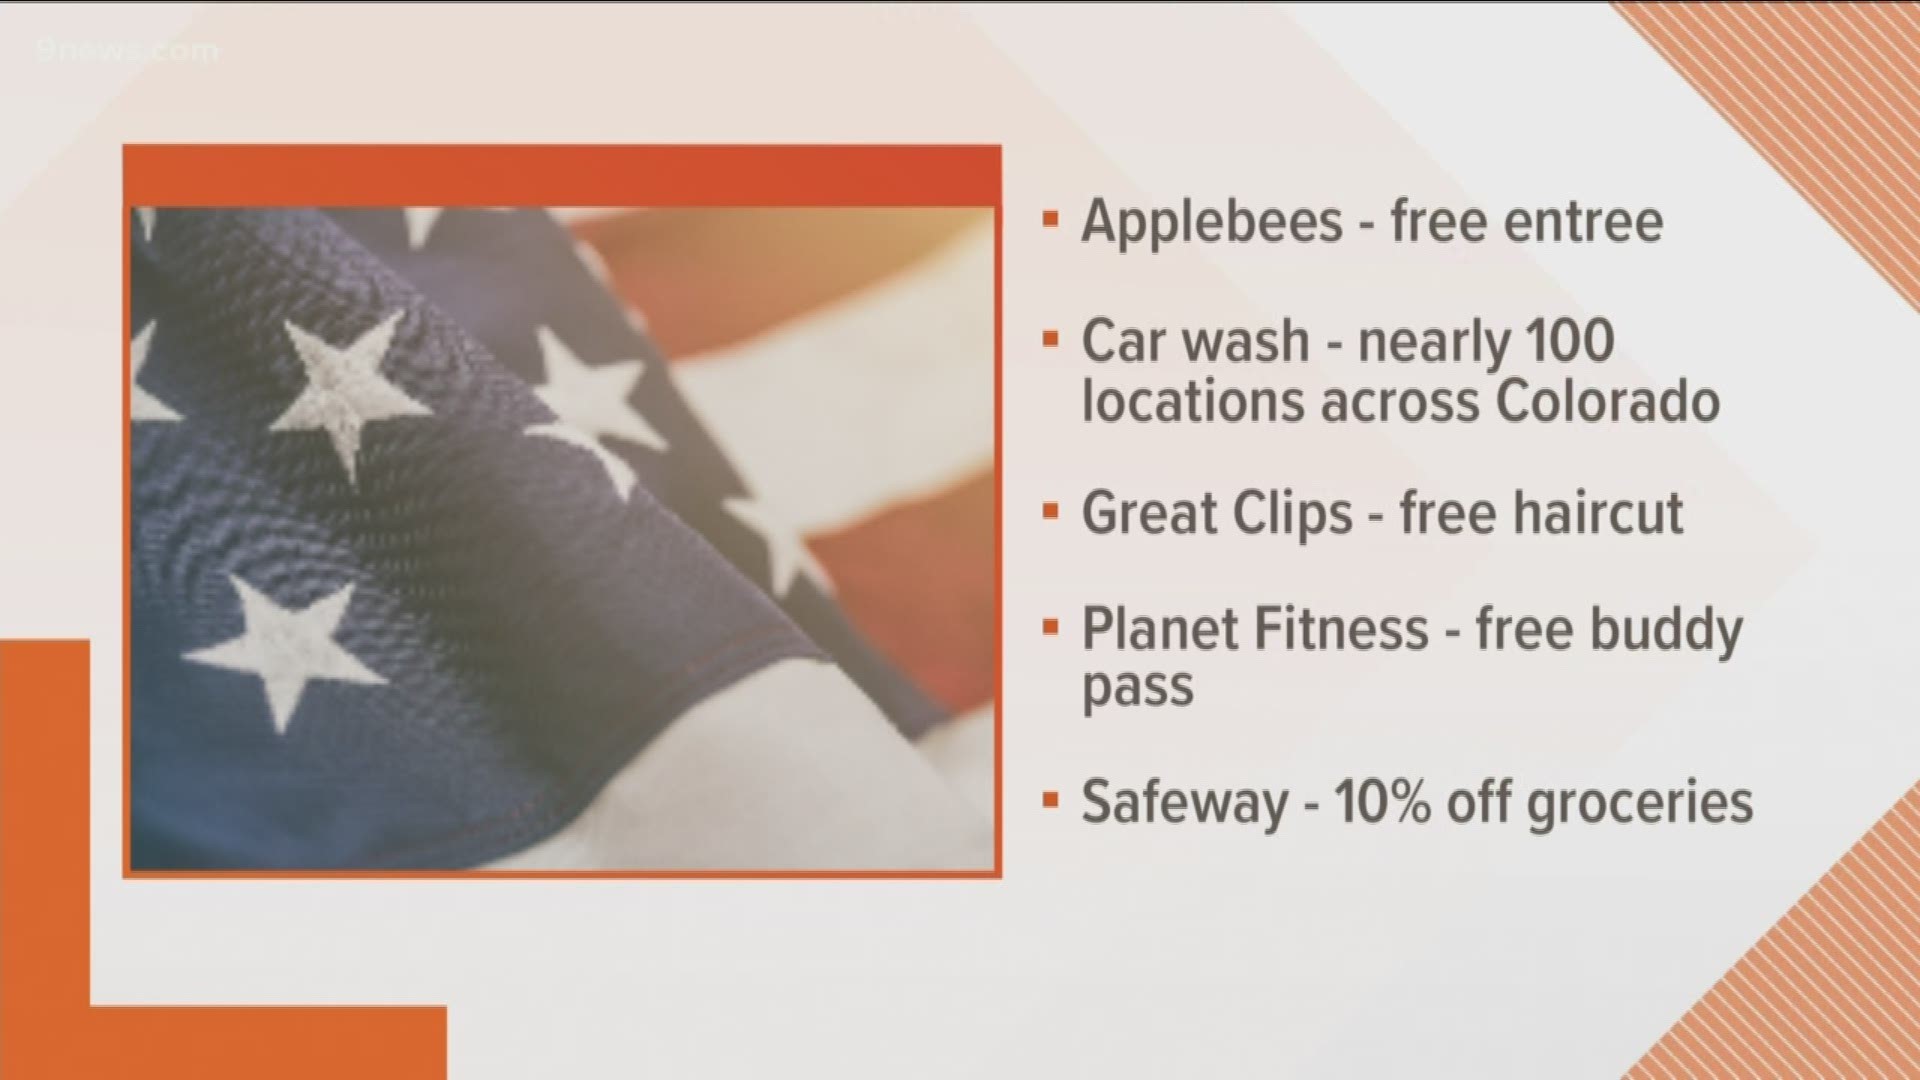 There's are dozens of deals to honor veterans. Here's a look at some of those happening around the Denver metro area.